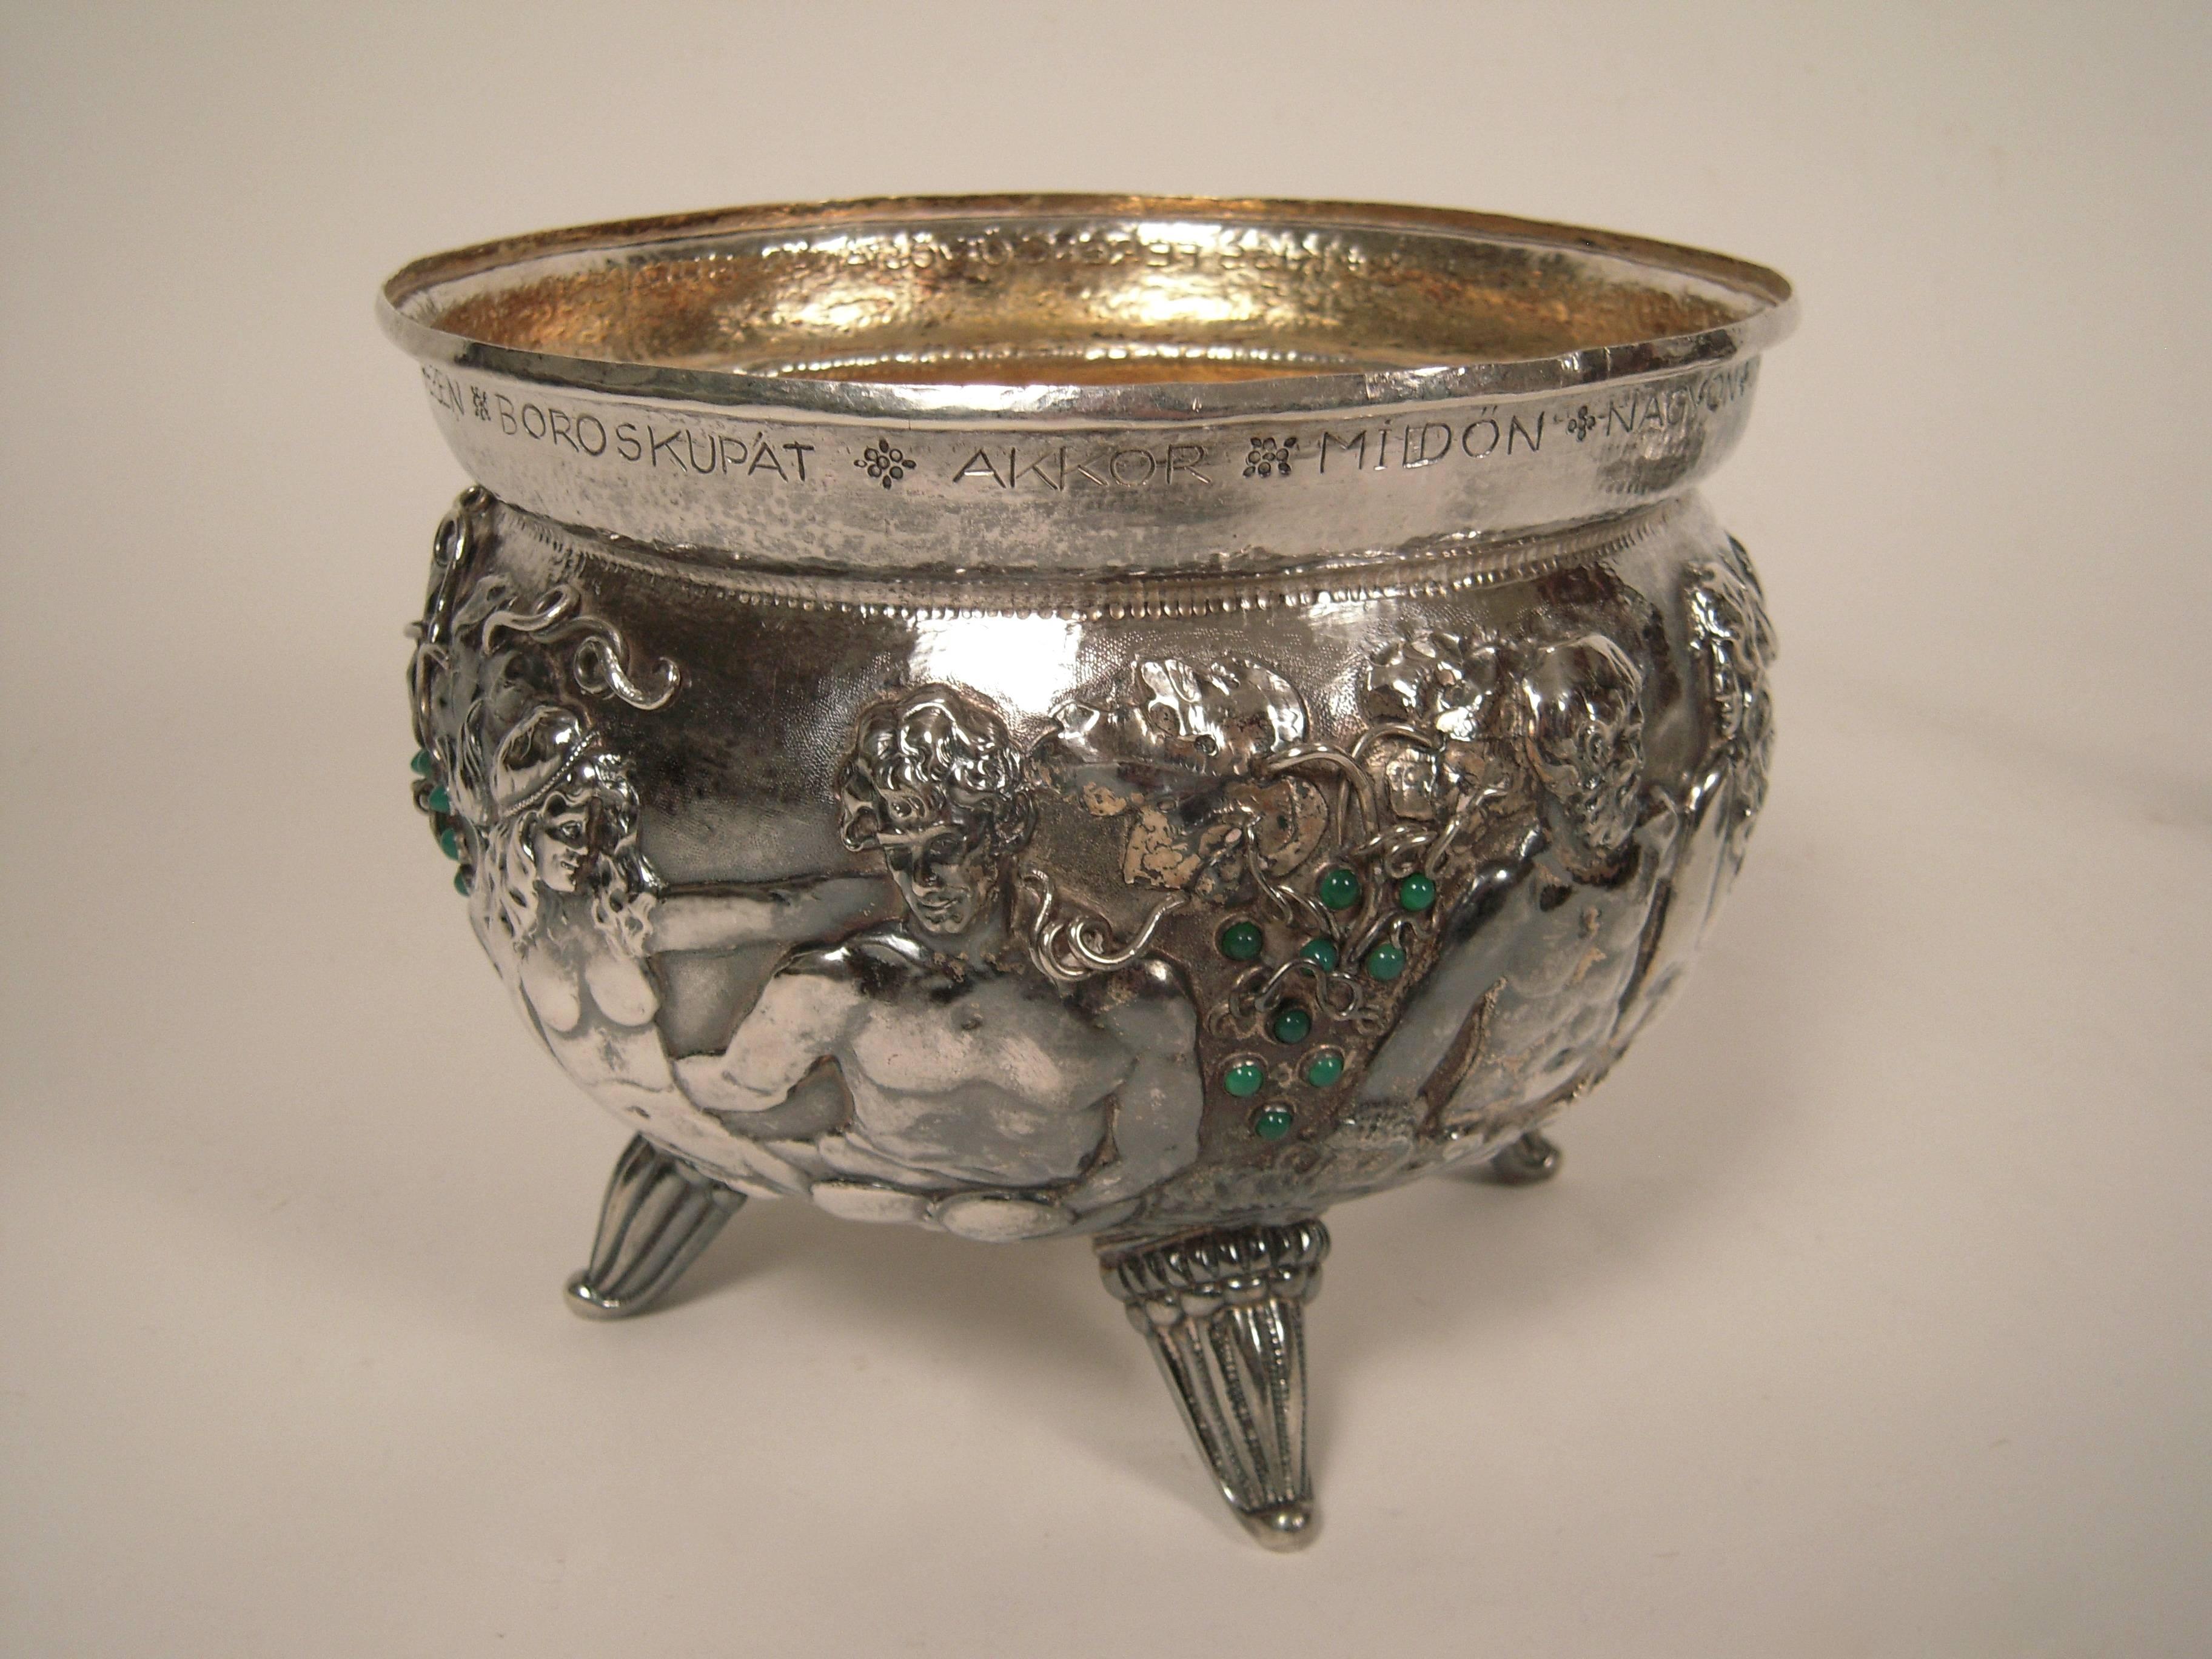 An unusual and beautifully hand made Hungarian bejeweled silver tureen, with Bacchanalian wine and fertility themes, made by a goldsmith and dedicated to his professor, the conical cover with a finial in the form of a satyr holding a chalice with an